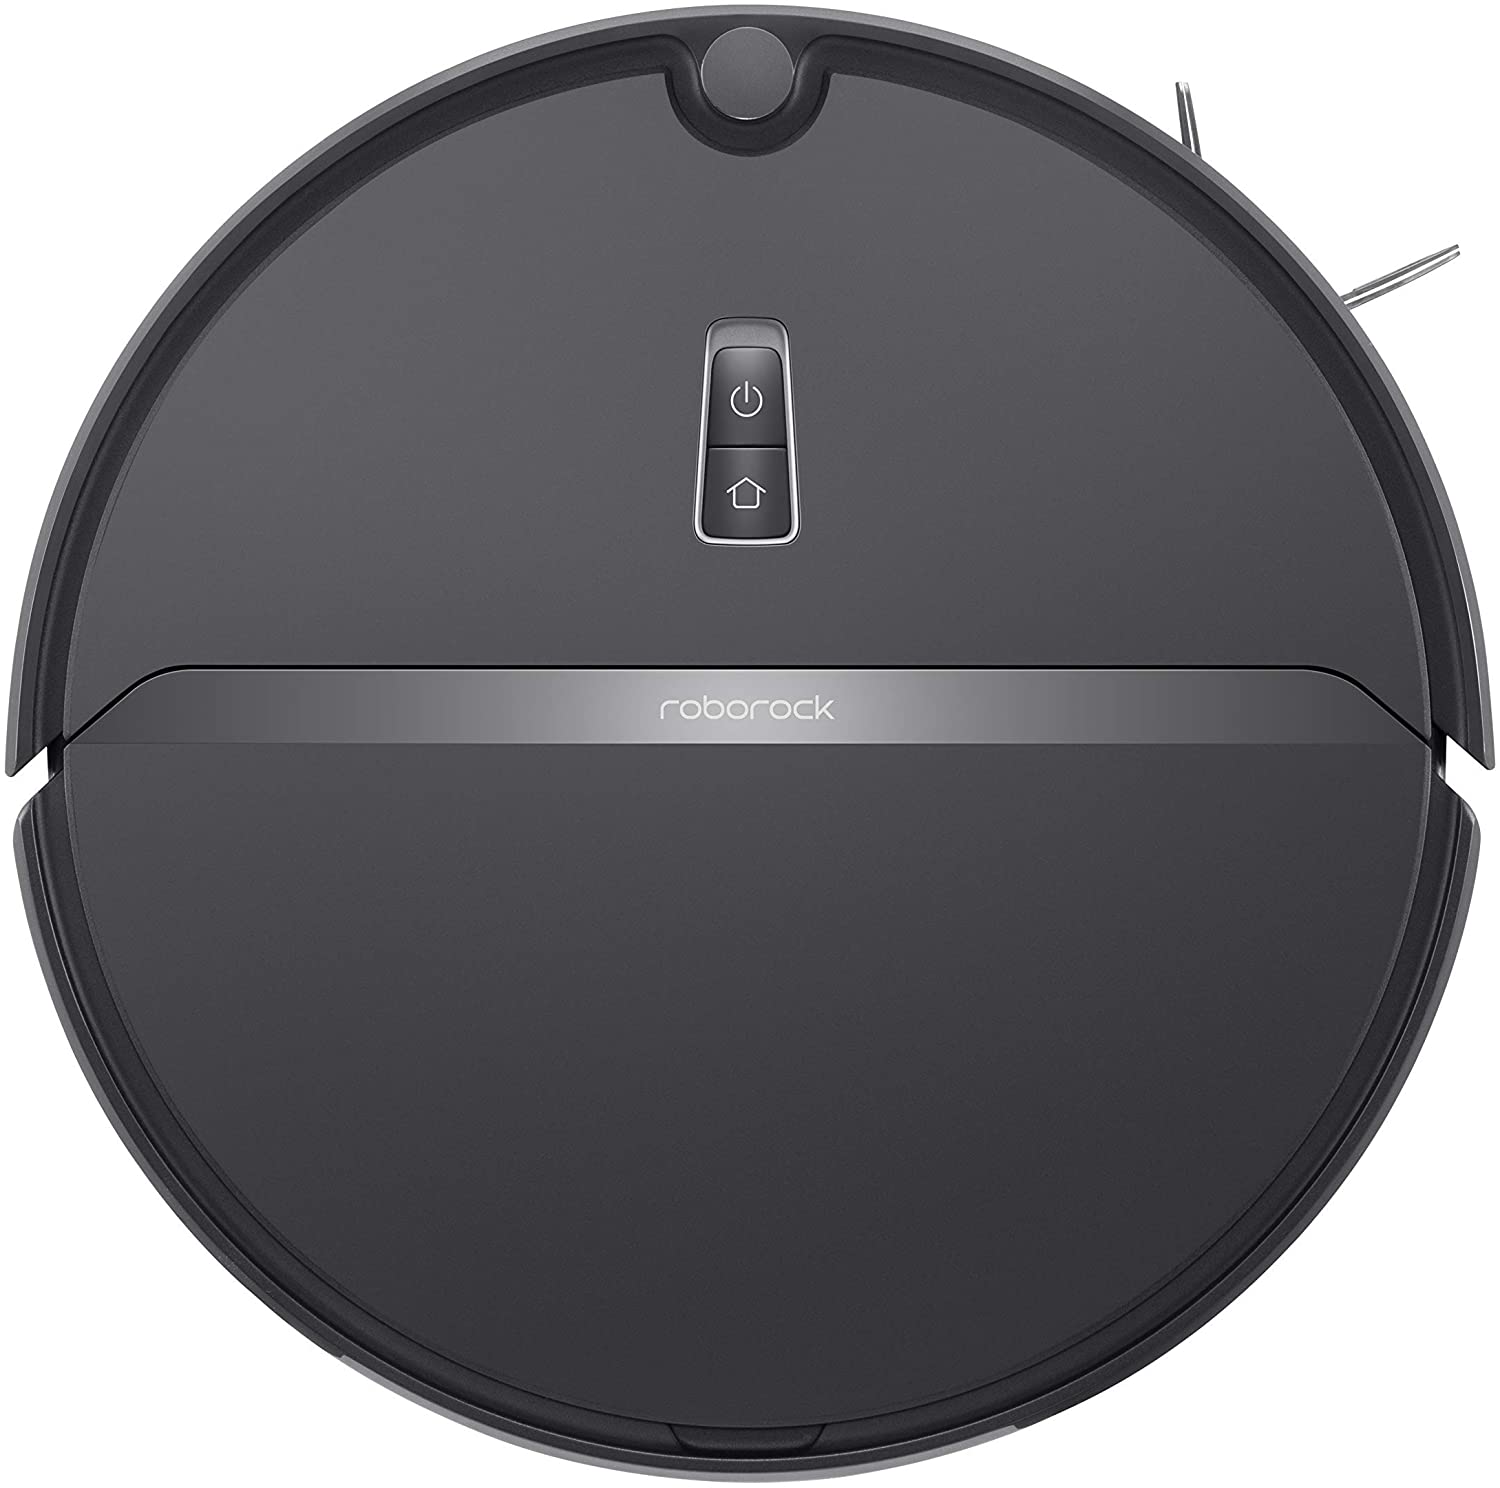 Roborock E4 Mop Robot Vacuum and Mop Cleaner $229.99 + Free Shipping